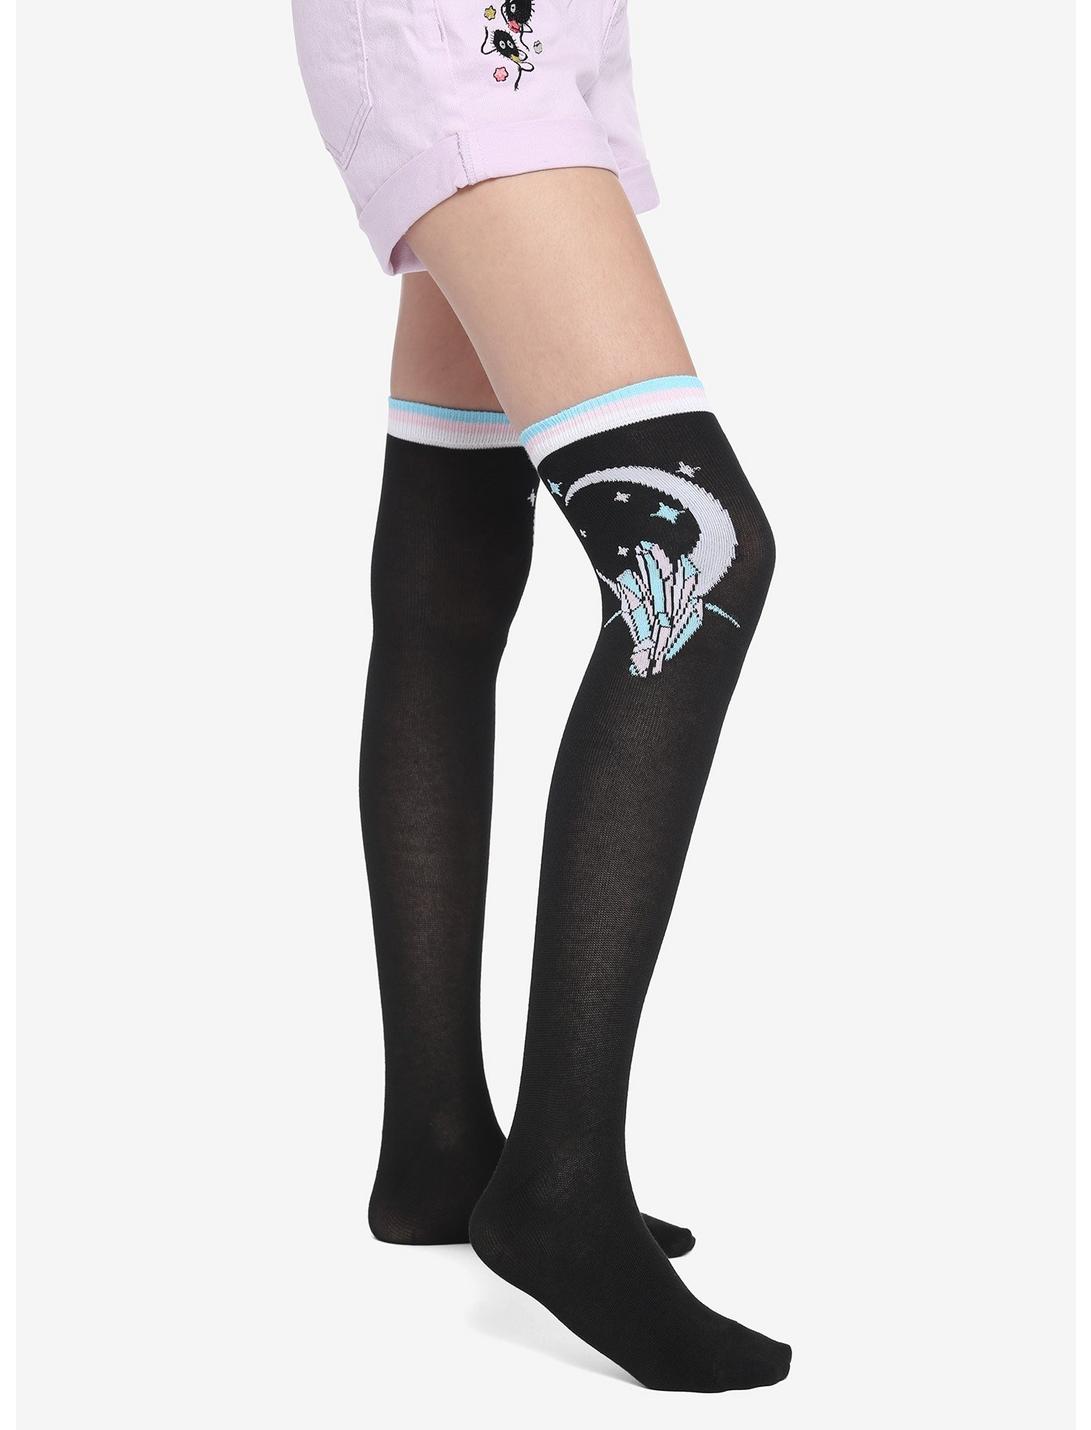 Crystals & Moons Over-The-Knee Socks, , hi-res